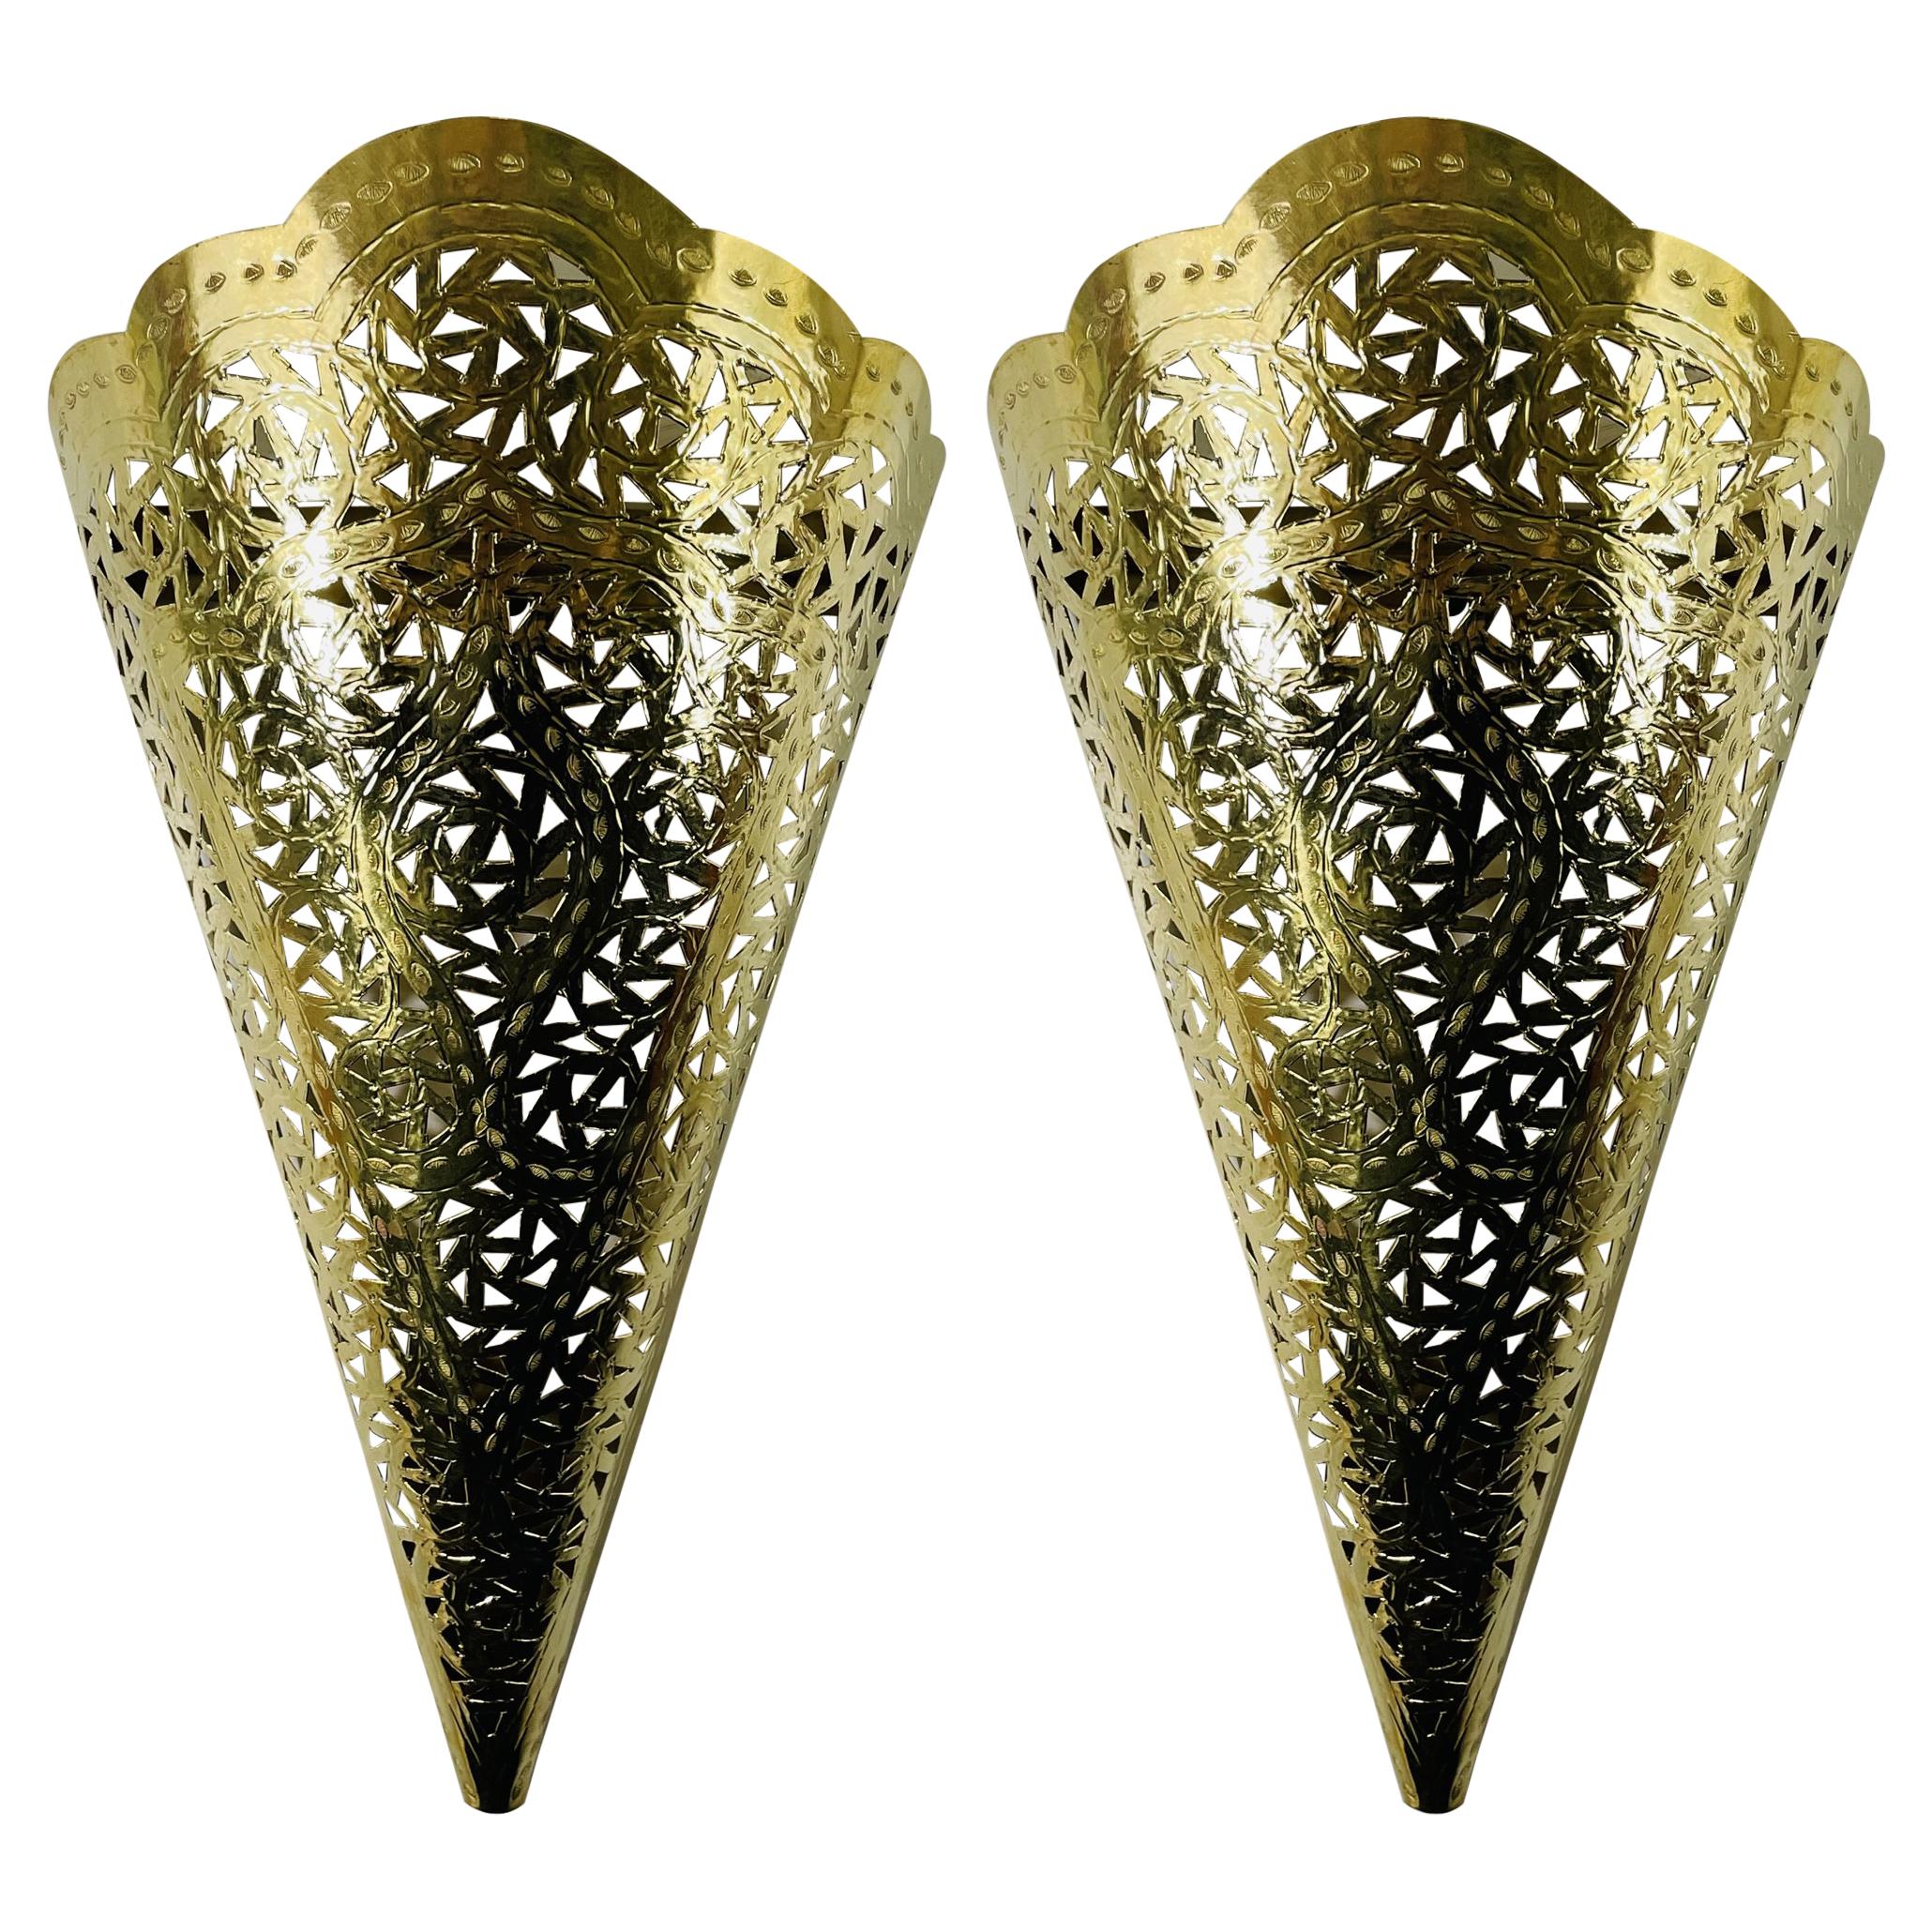 Vintage Moroccan Moorish Brass Cone Shaped Wall Sconce Shade, a Pair For Sale